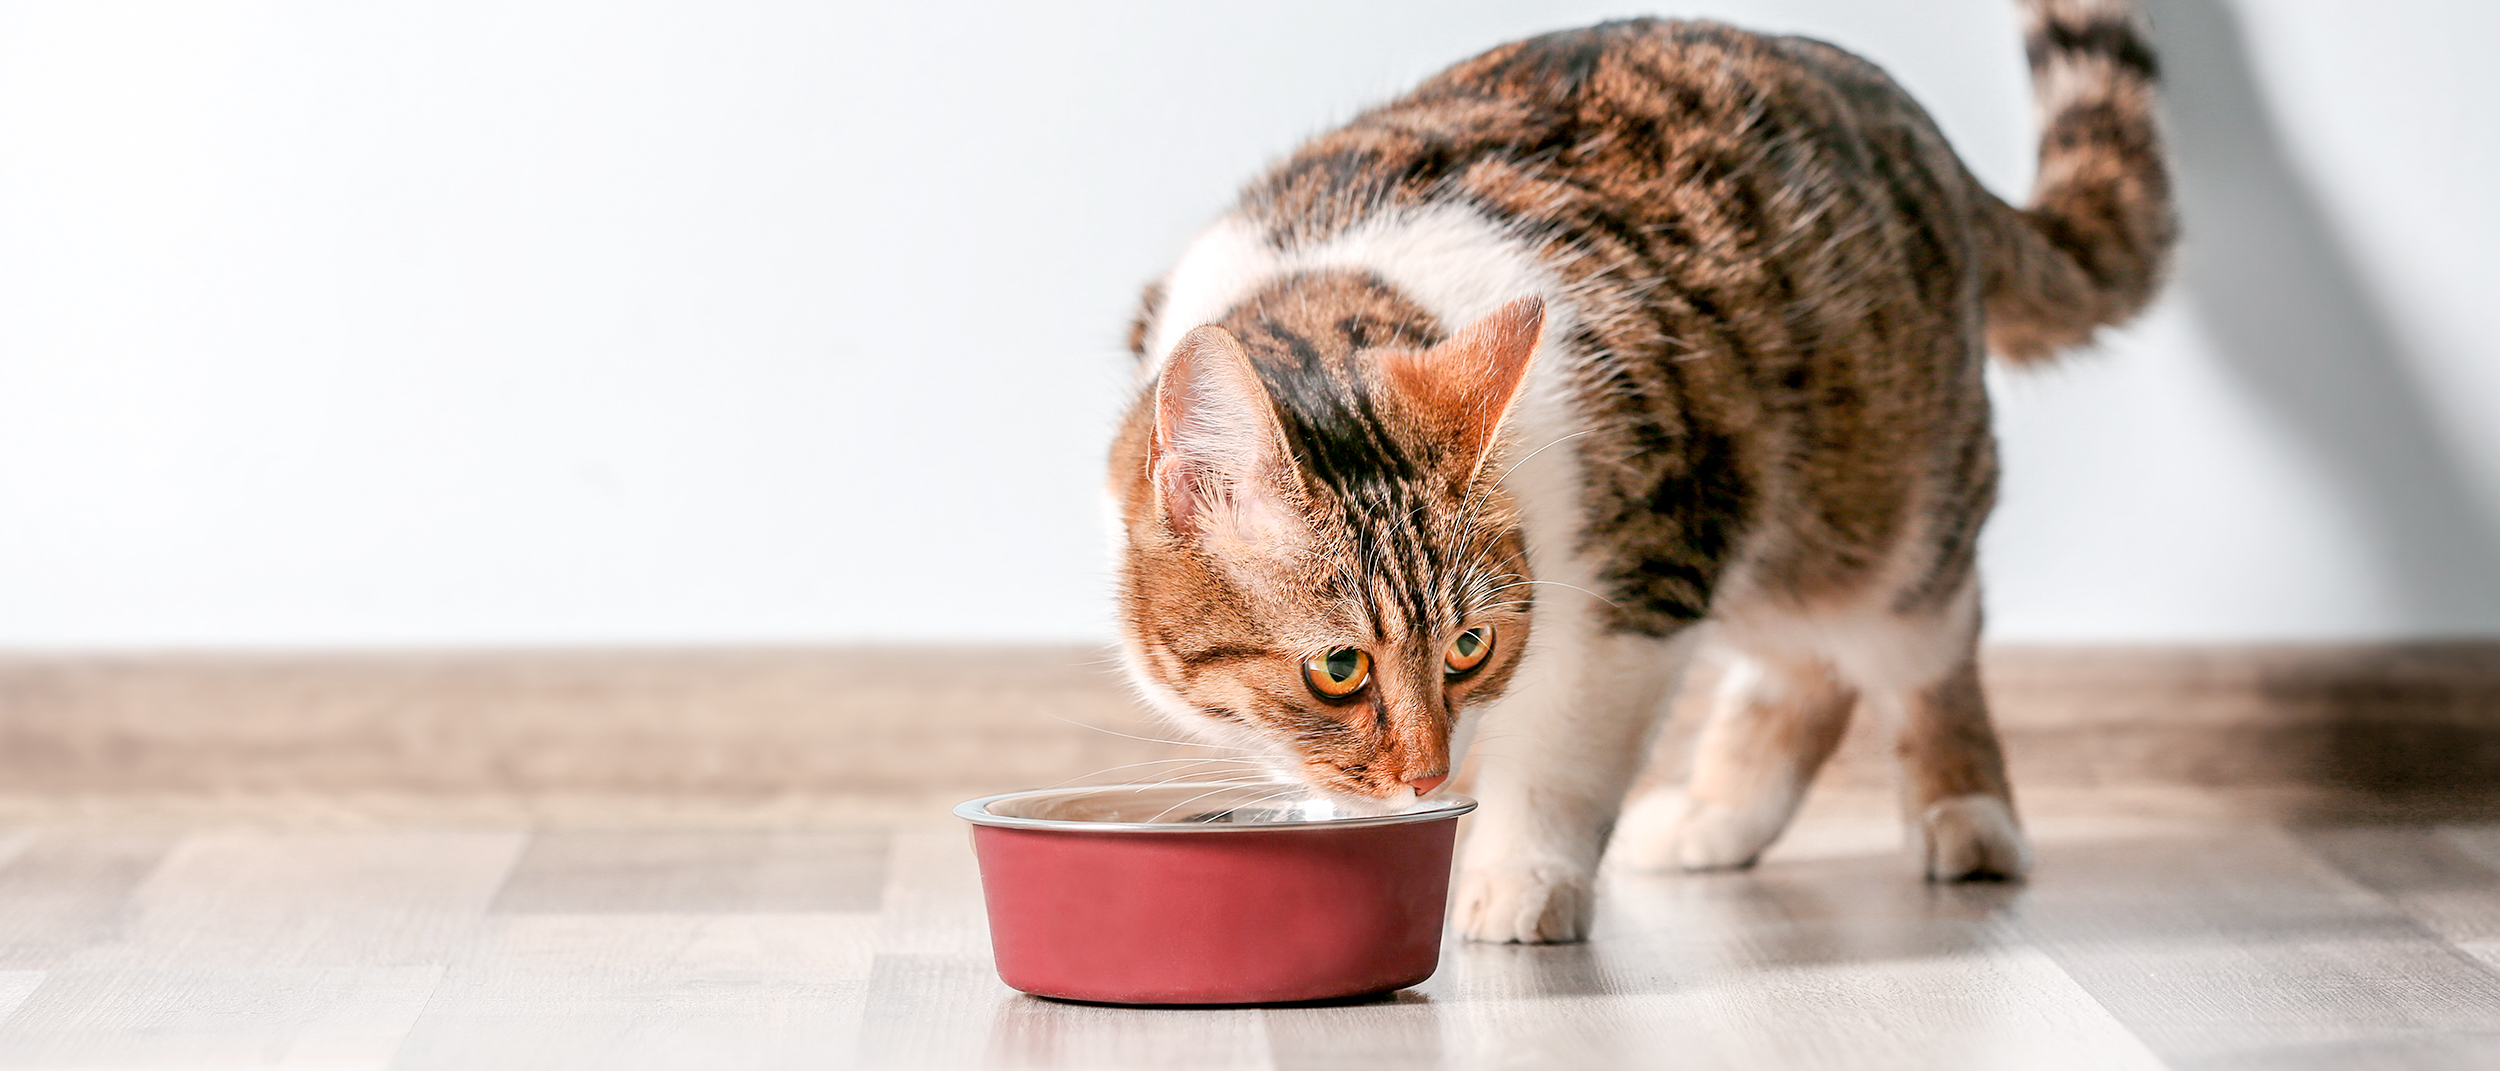 Ageing cat standing indoors eating from a red bowl.